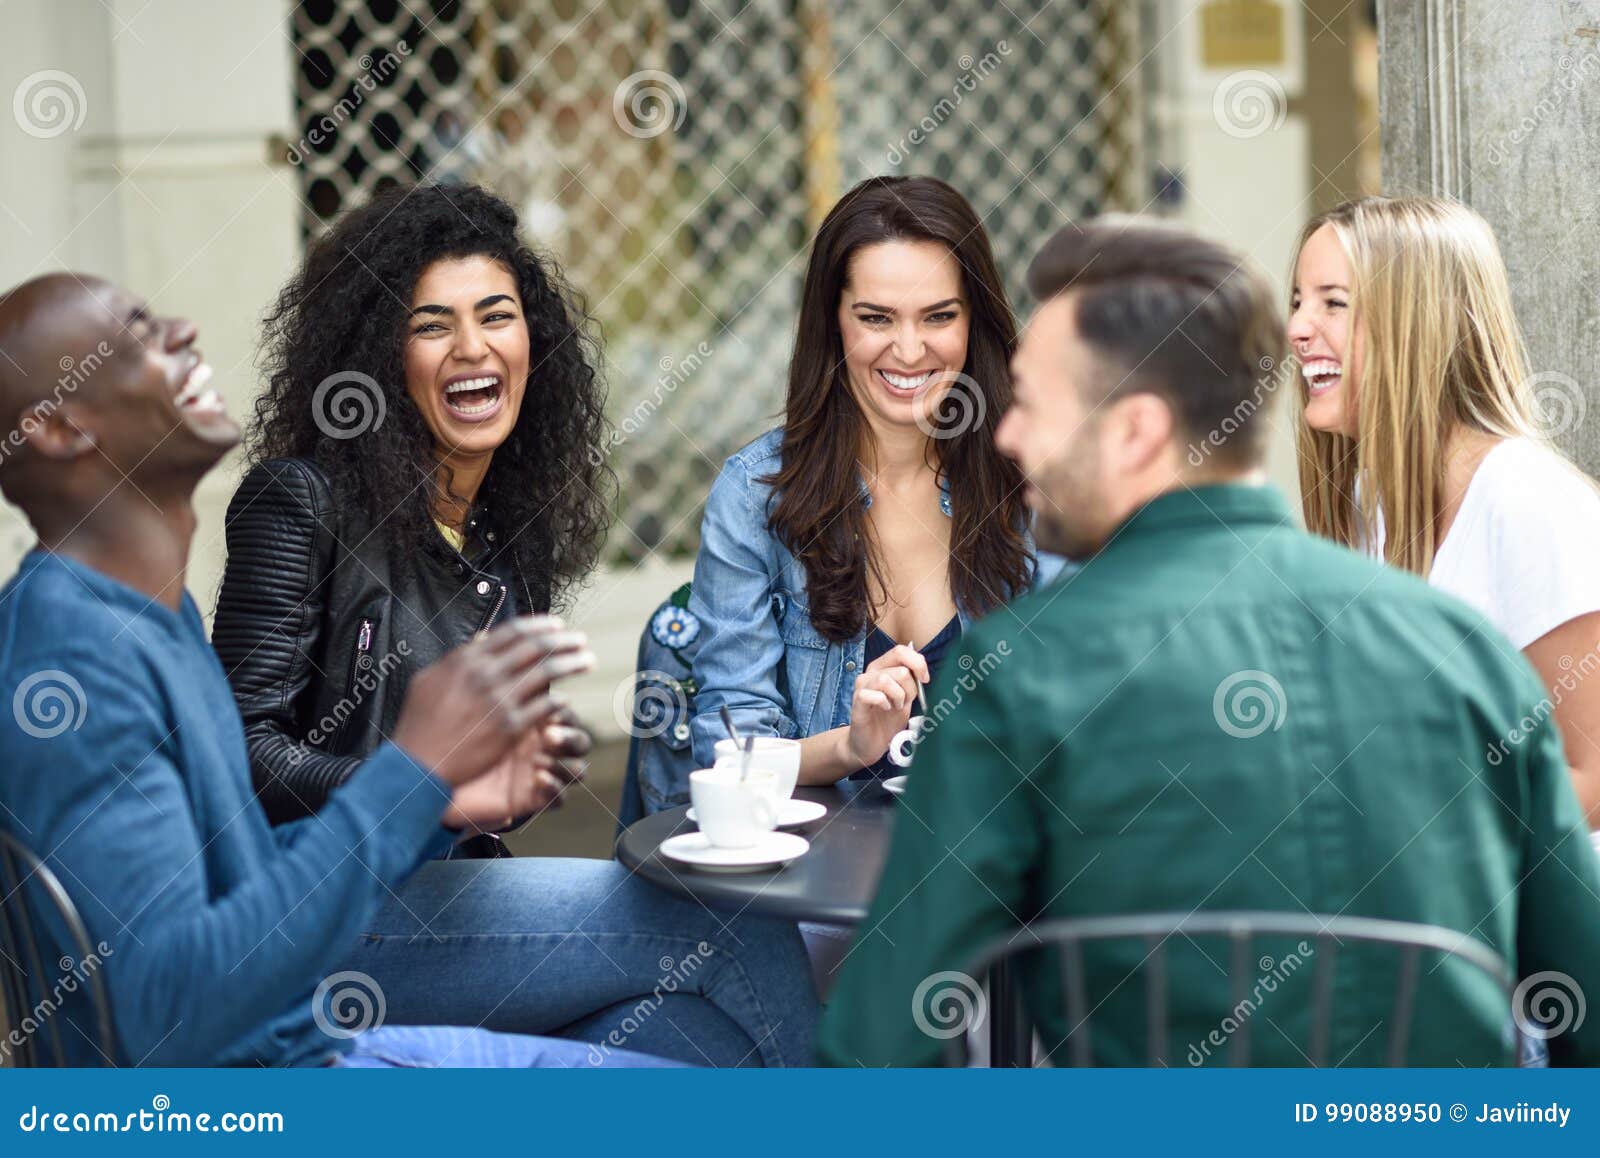 multiracial group of five friends having a coffee together